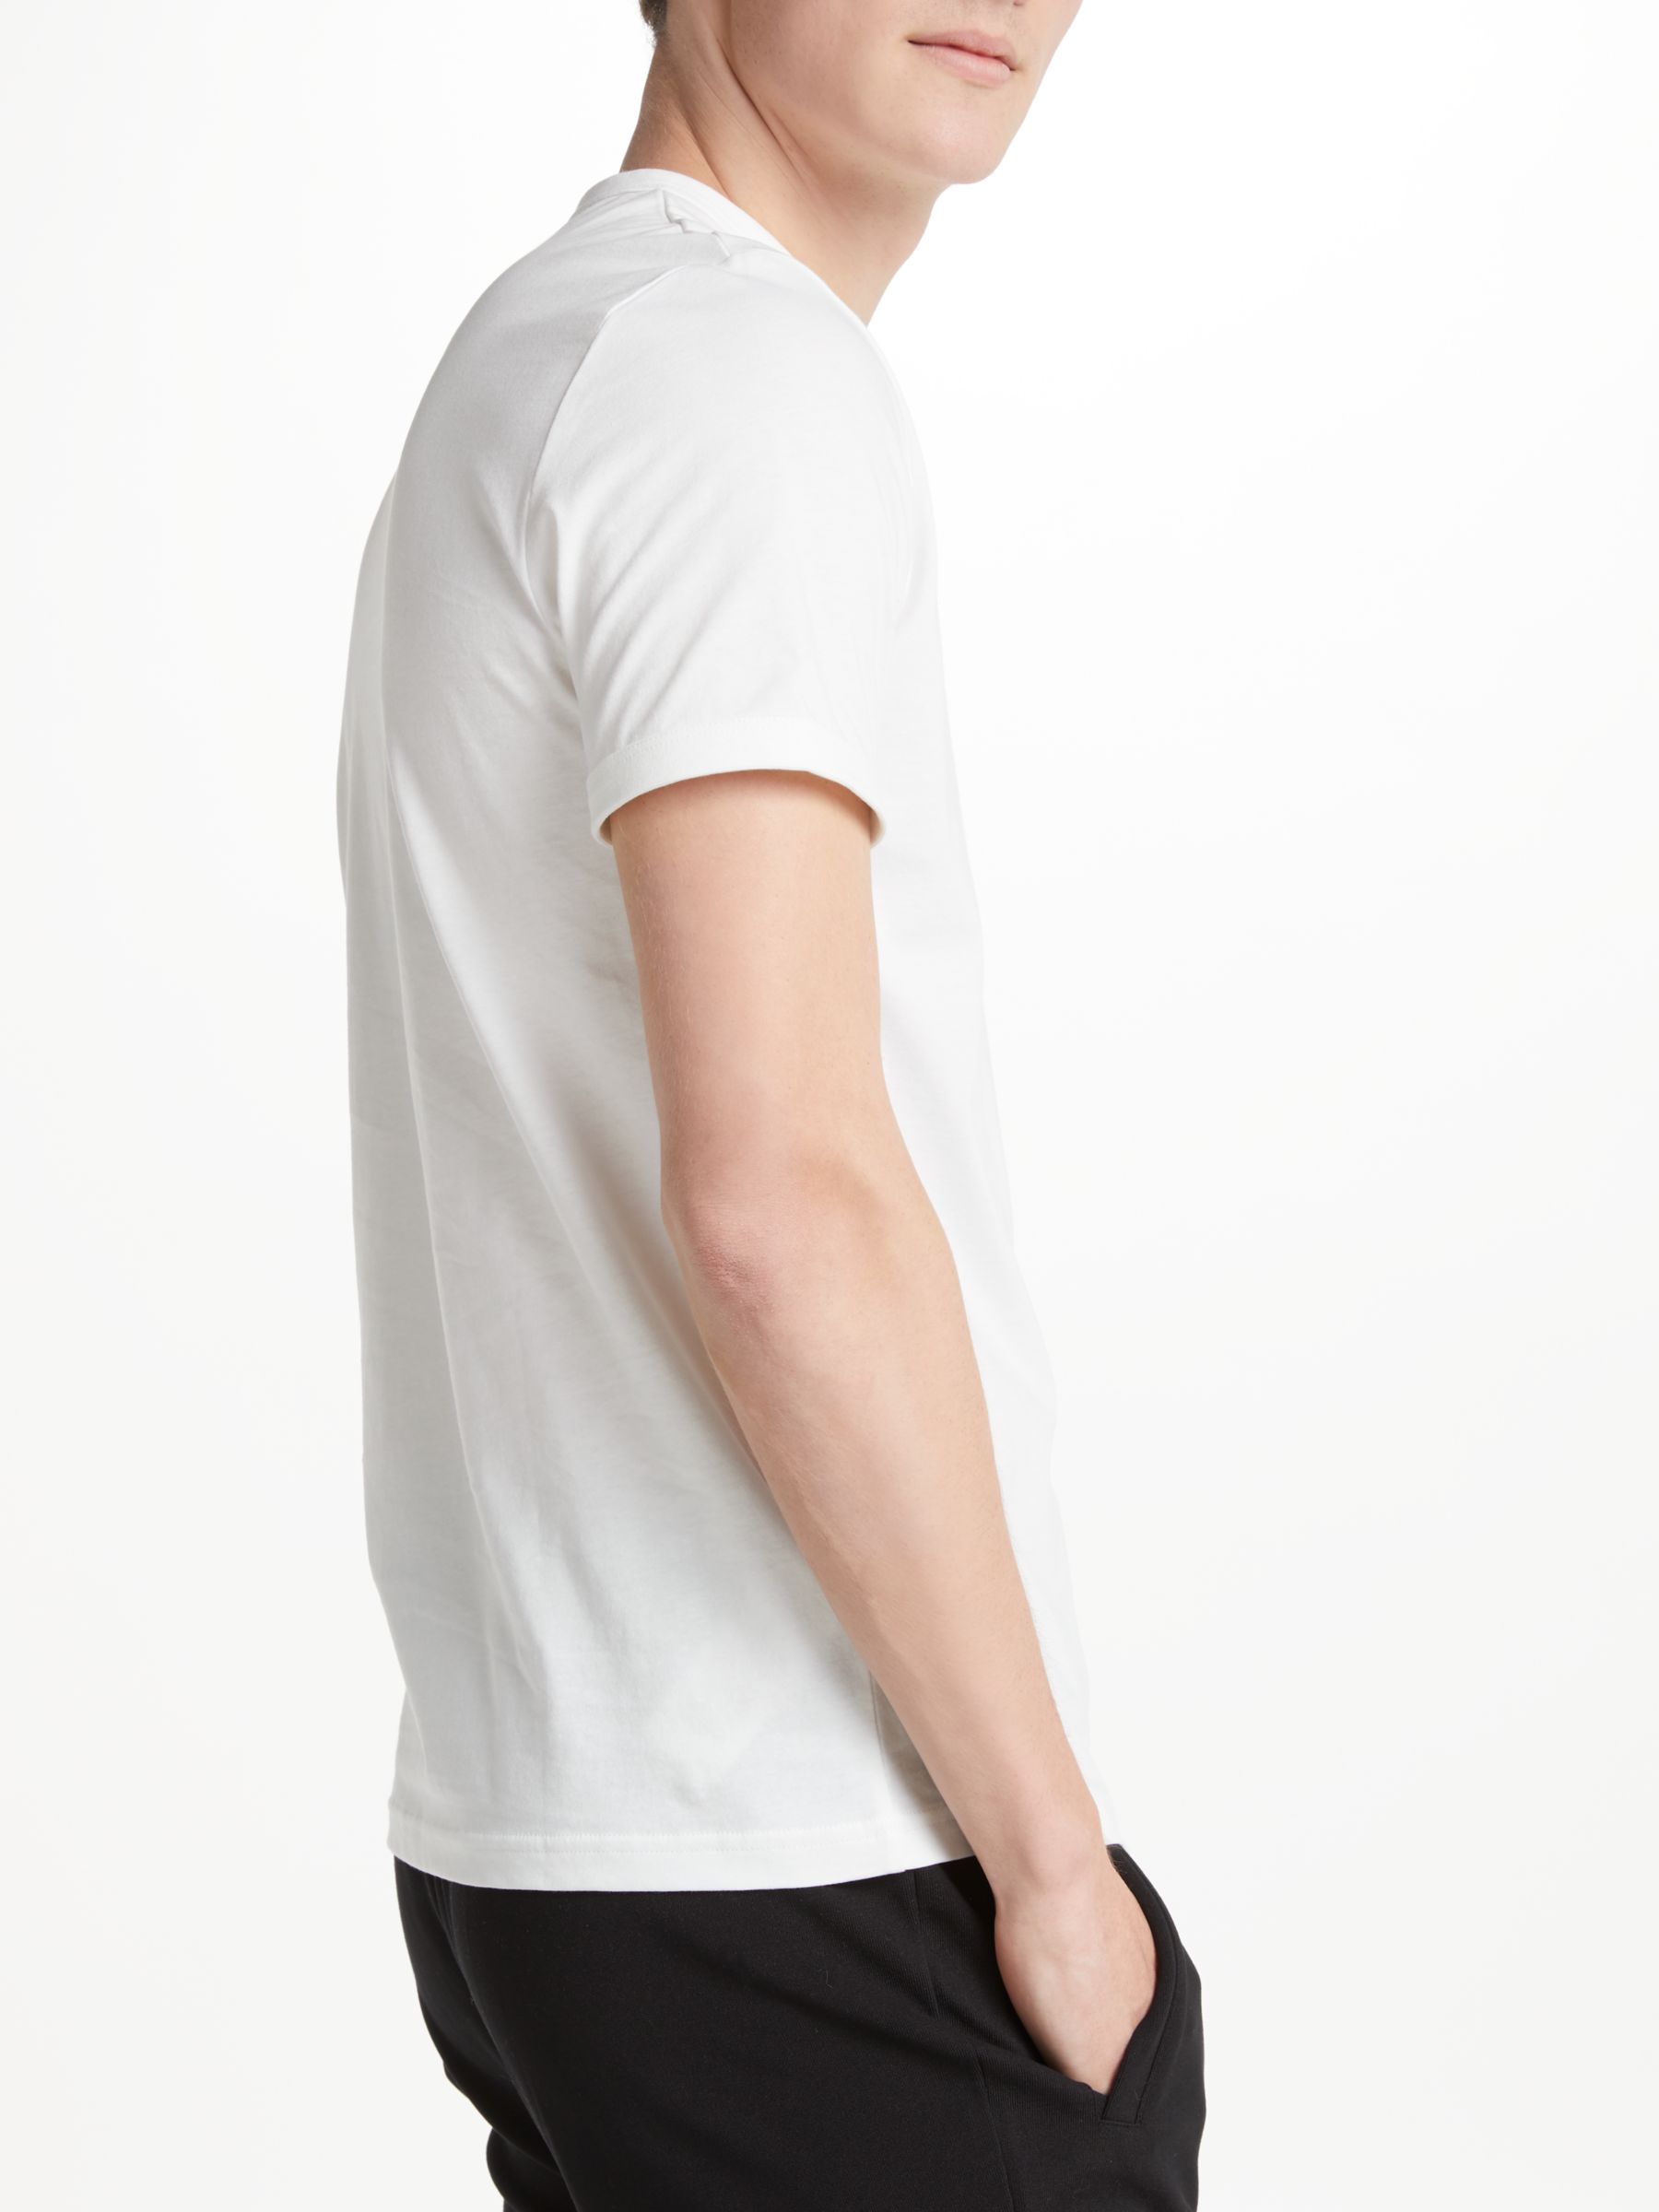 Fred Perry Ringer Crew Neck T-Shirt, White at John Lewis & Partners